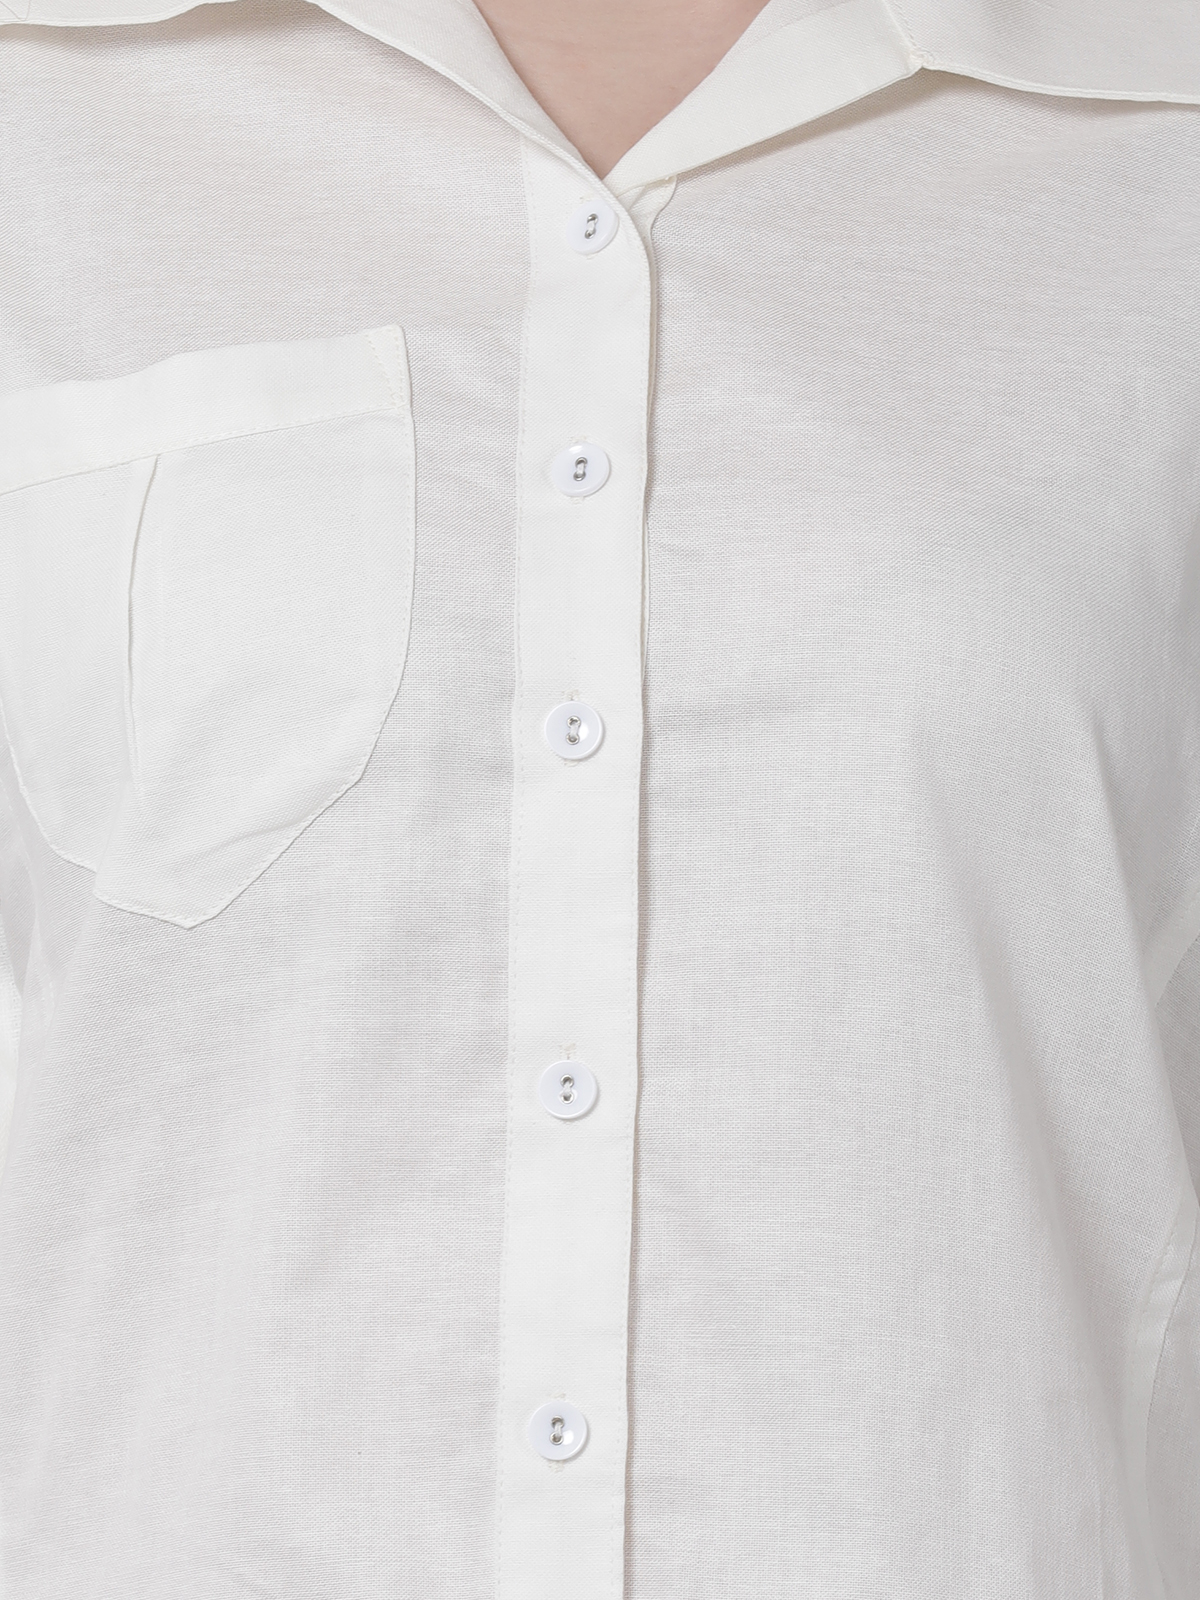 Solid White Cotton Linen Full Sleeve Casual Shirt